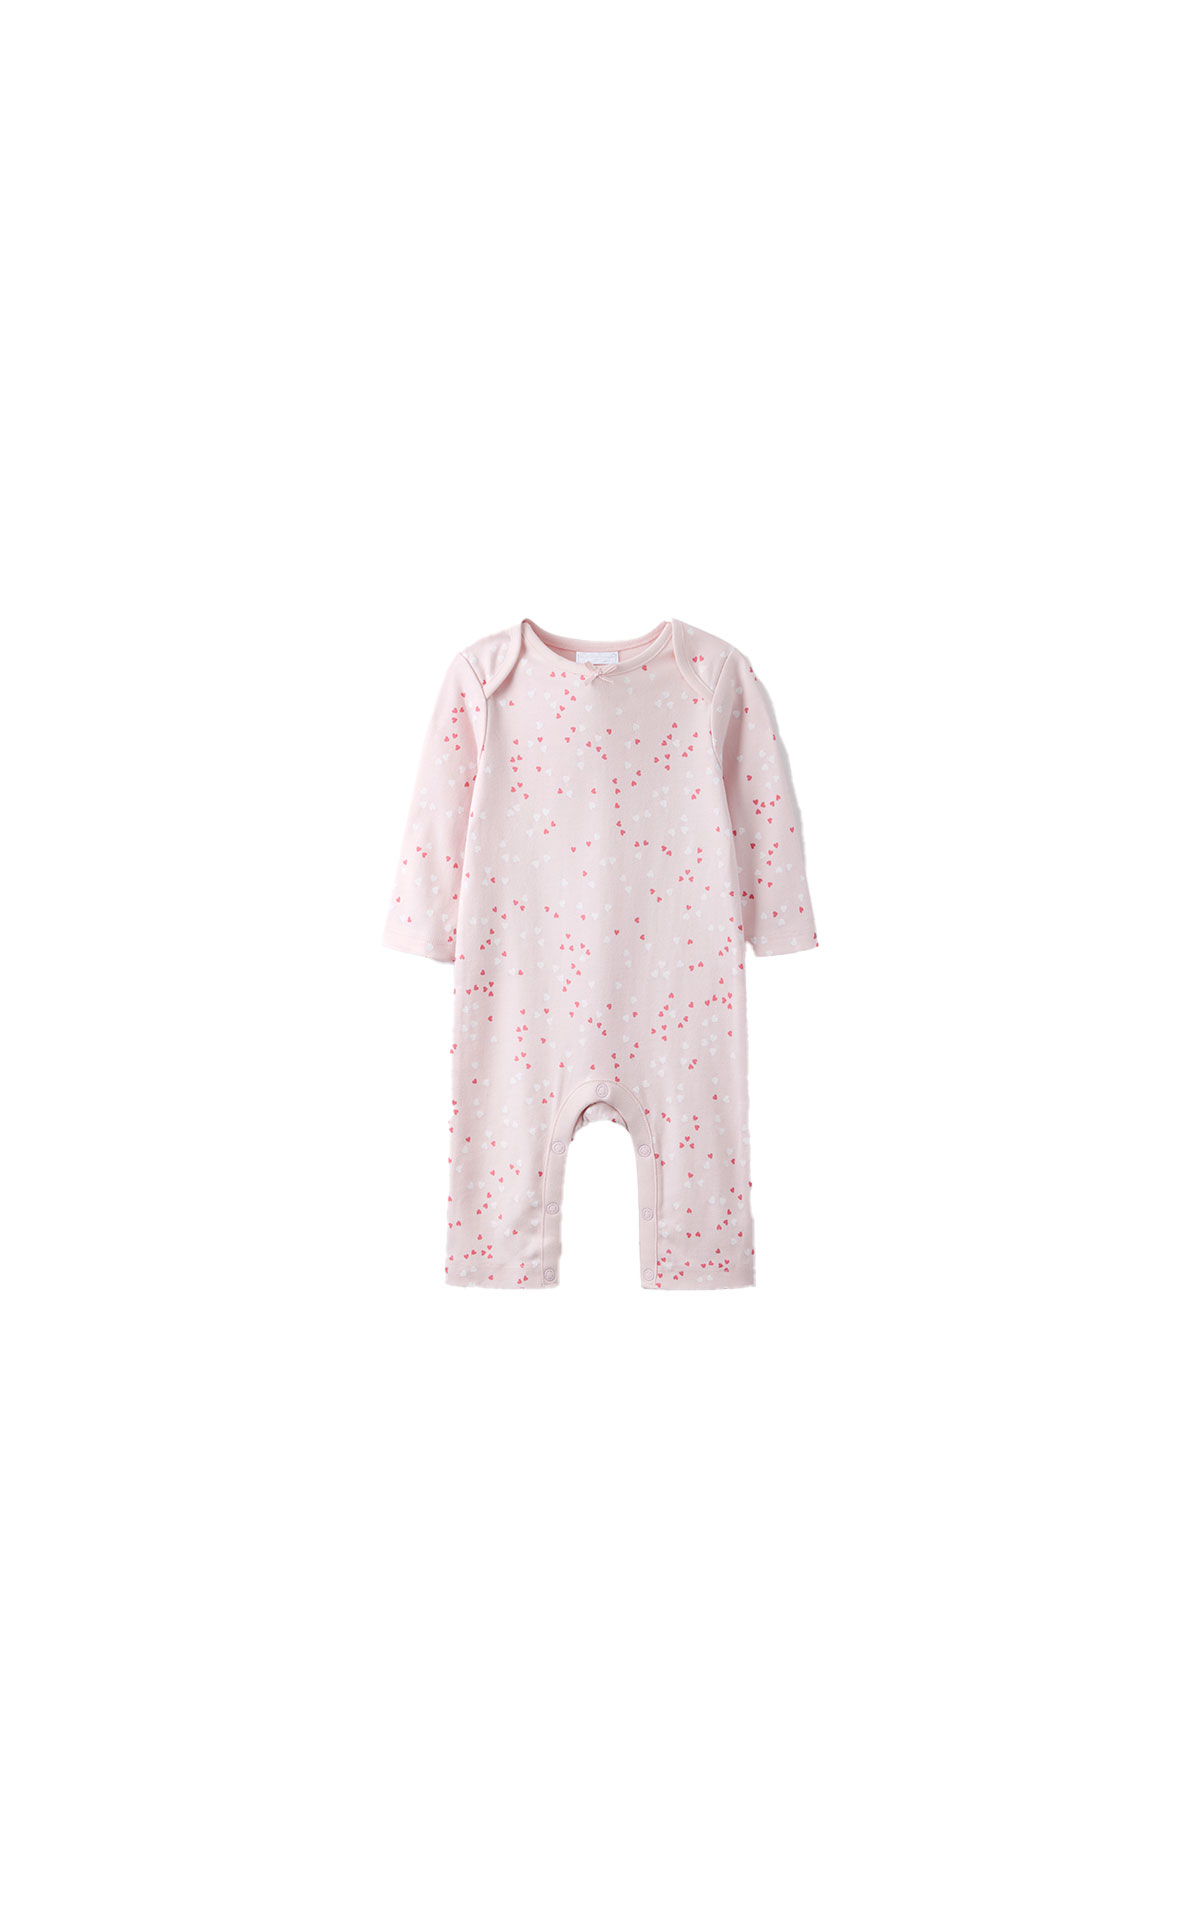 The White Company Heart print sleepsuit from Bicester Village